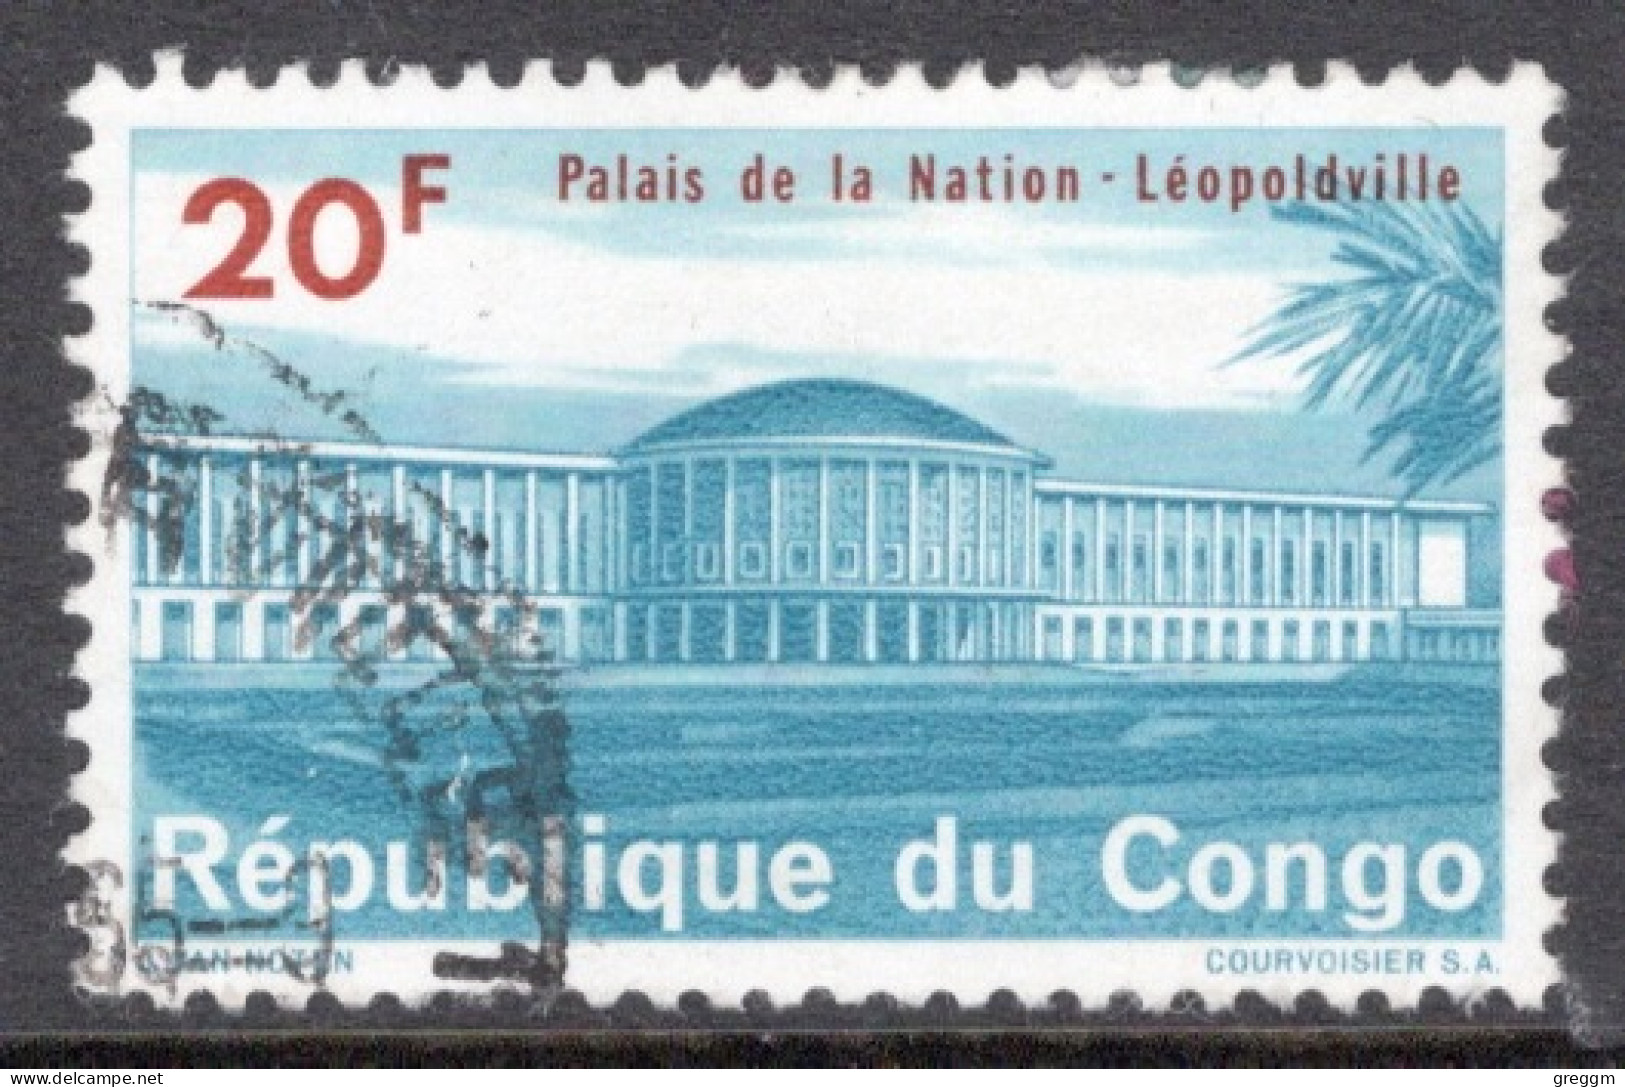 Kinshasa Congo 1964 Single 20f Stamp From The Definitive Set  National Palace, Leopoldville  In Fine Used. - Usados